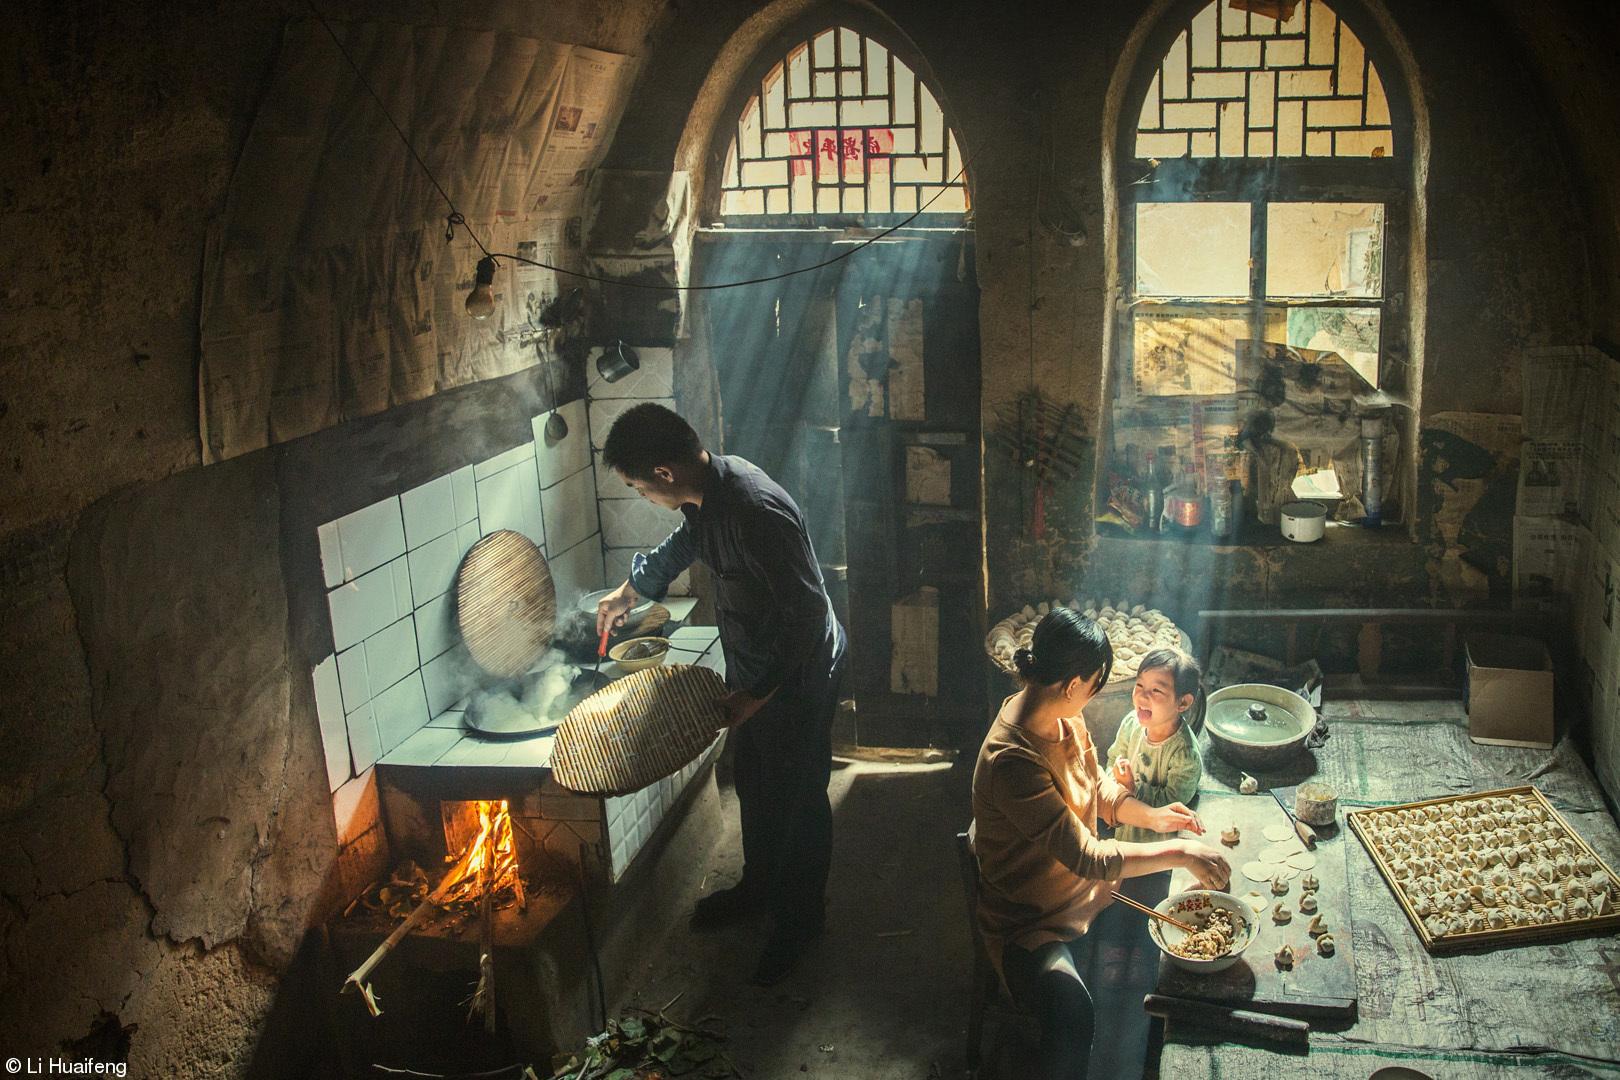 A man is shown tending to cooking with a woman behind him preparing good next to a young child.